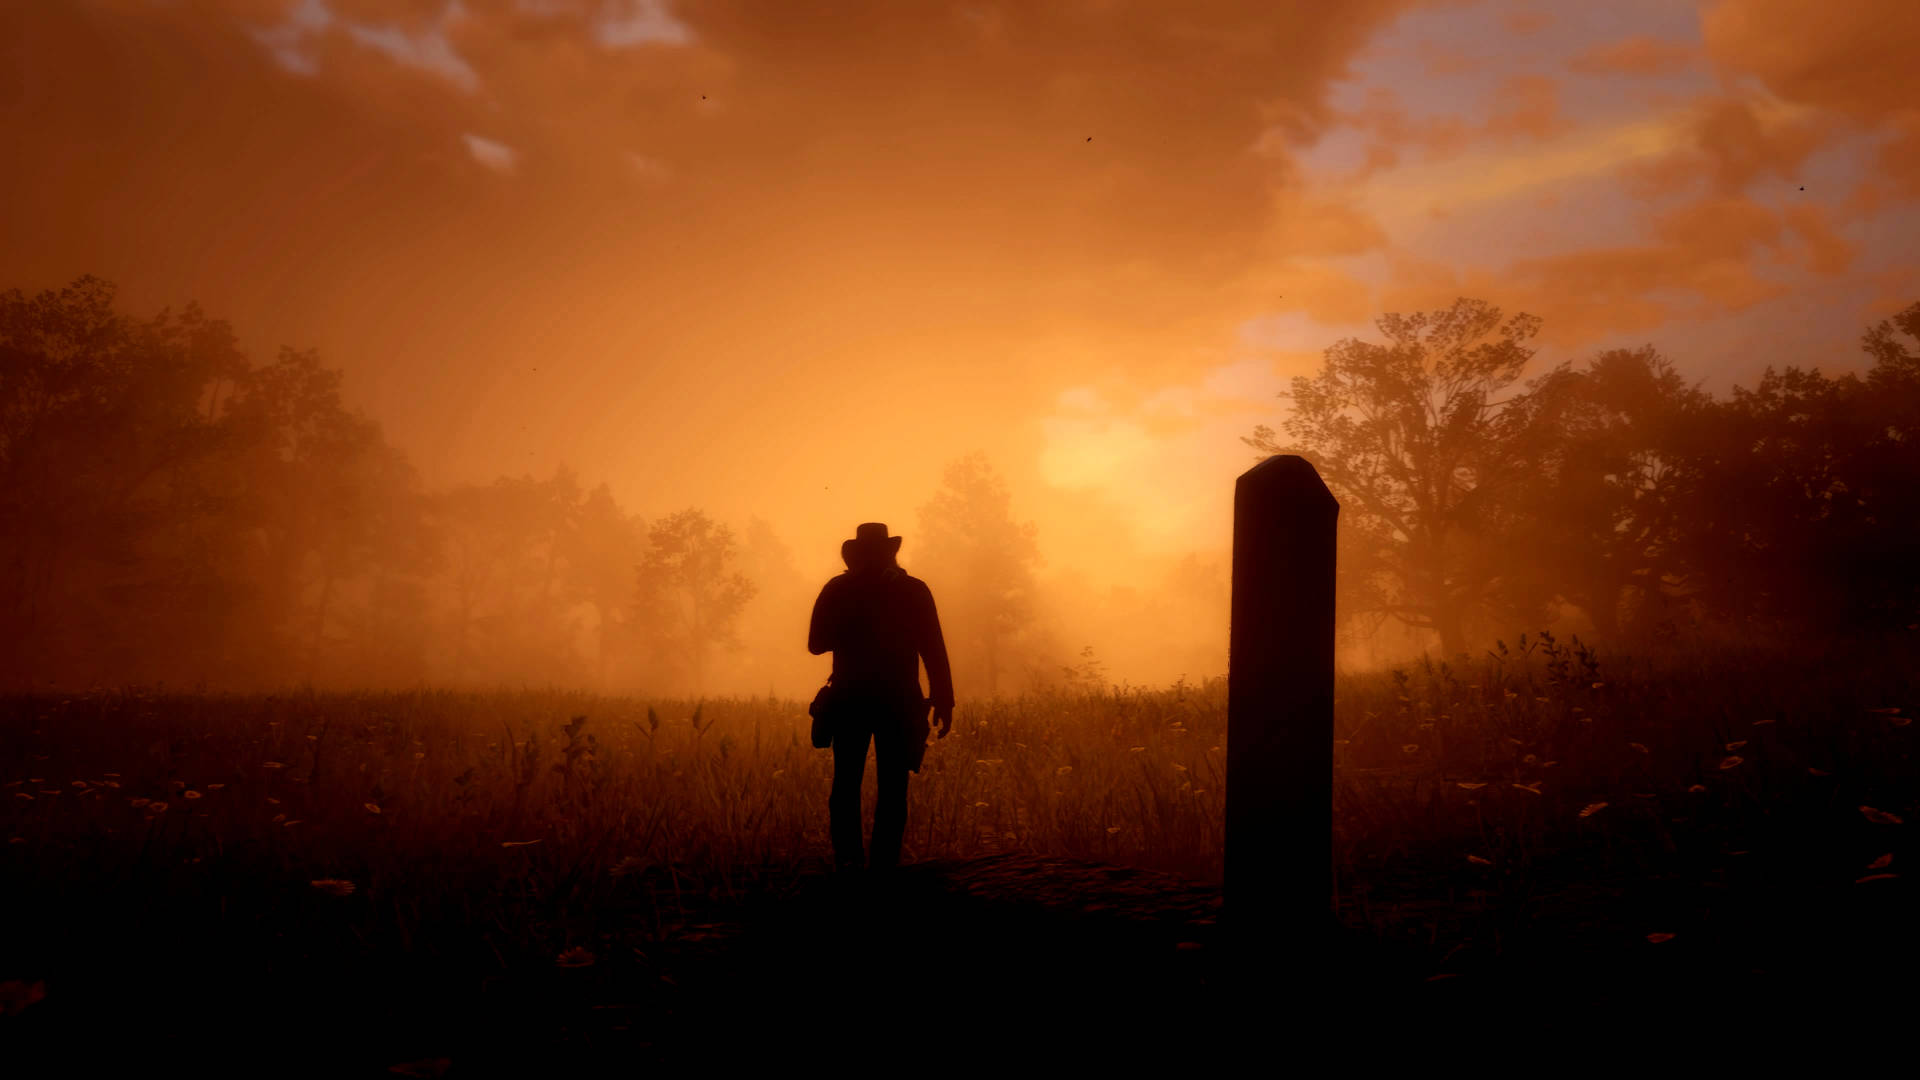 "Explore The Wild West In Red Dead Redemption 2" Wallpaper